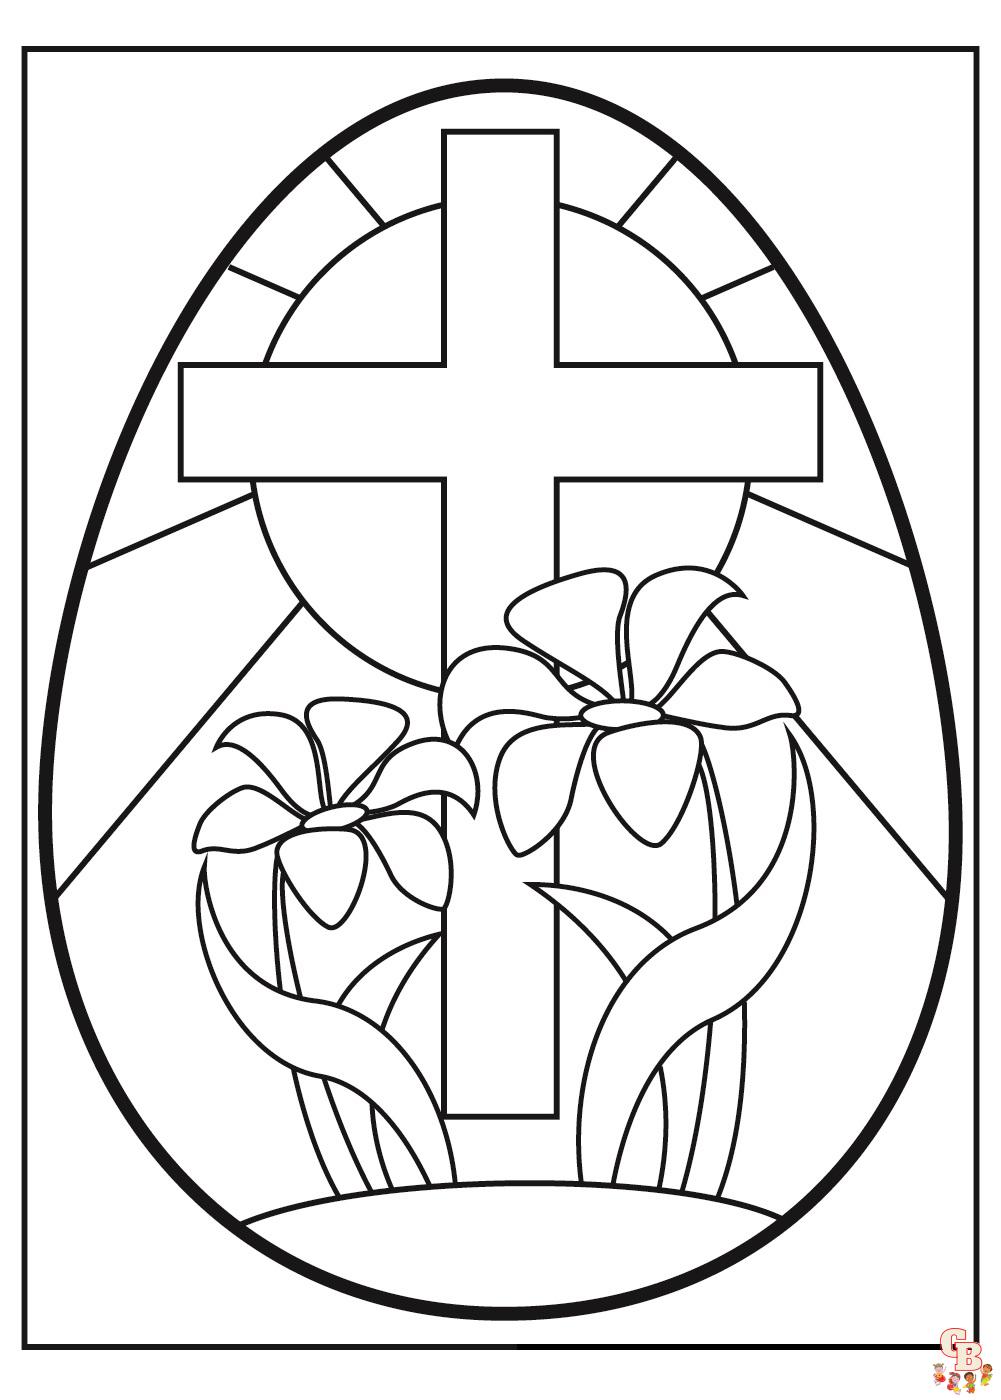 celebrate-resurrection-with-free-printable-coloring-pages